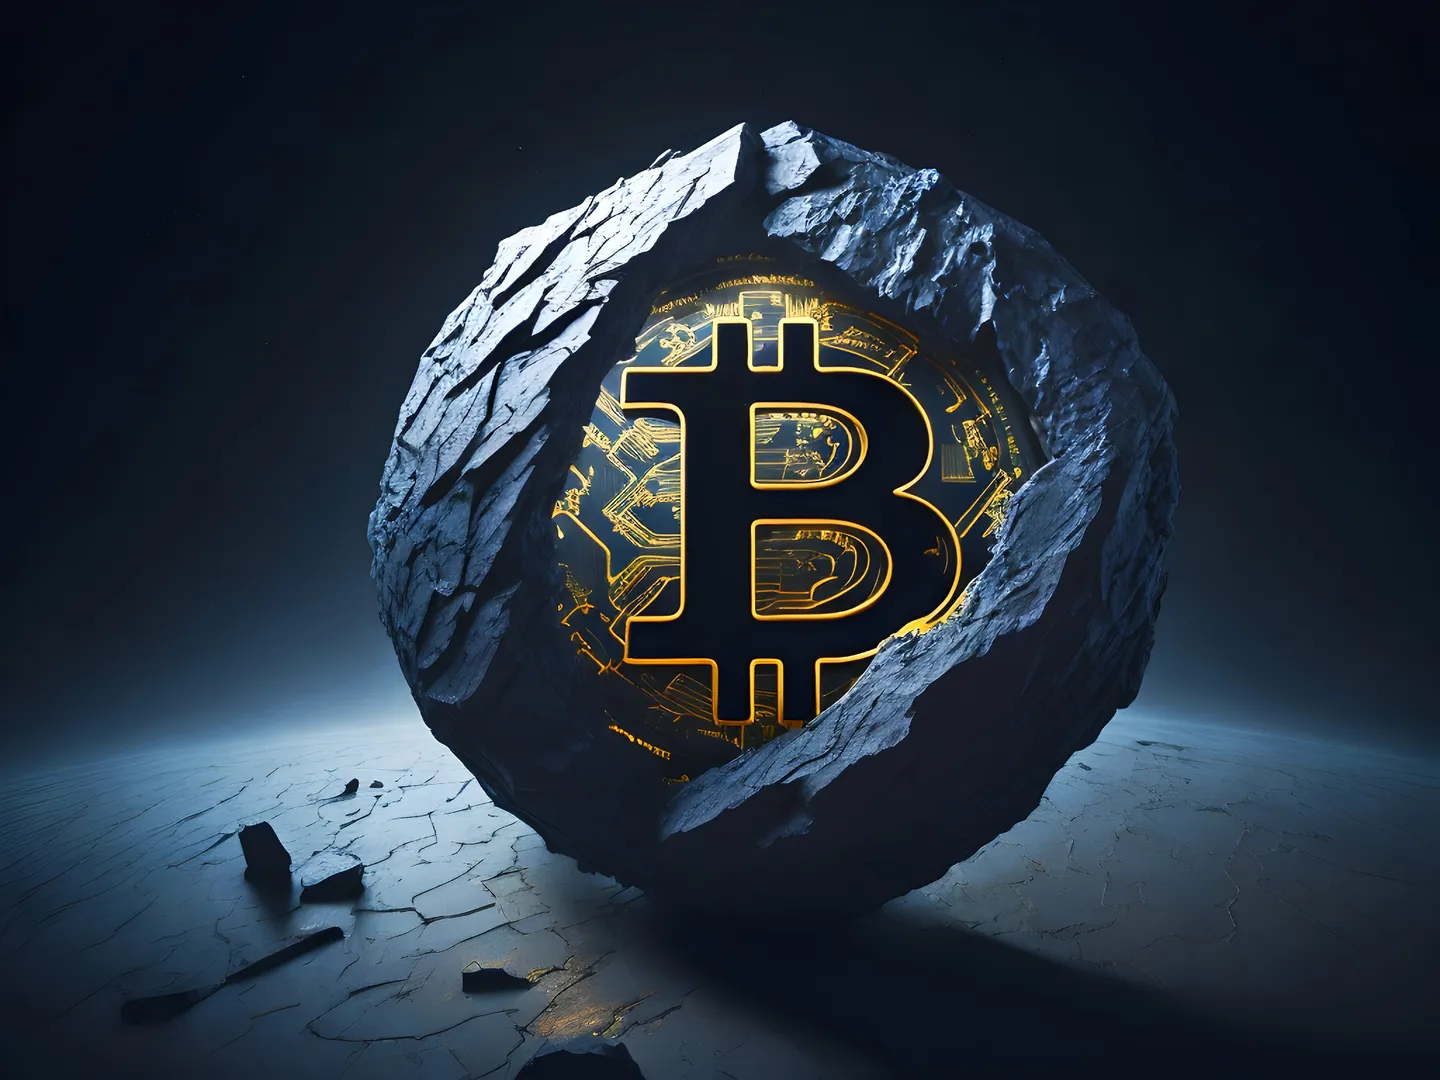 GM, Web3Daily readers!

---
🌟 Glance at Today's Edition:
---

💼 BlackRock files for spot Bitcoin ETF, a groundbreaking move in crypto.
📊 ETFs make it easy to invest in assets like Bitcoin without owning them.
💭 BlackRock's move indicates a shift in stance, boosting crypto community excitement.
🚀 BlackRock is the world's largest asset manager, overseeing $9 trillion in AUM.
🏦 SEC has turned down multiple spot Bitcoin ETF applications, BlackRock is the 28th to file.
💰 ETF approval could trigger a buying frenzy and boost Bitcoin's price.
🗓️ Timeline for approval process, surprises possible in the crypto world.
💥 Bitcoin's integration into institutional investment landscape can positively impact its price.
🕰️ Final decision expected by February 23, 2024, with potential price volatility around August 12.

---
🌑 Everything Surrounding the BlackRock Bitcoin ETF Filing
---

💎 BlackRock's Bold Move: The Bitcoin ETF Filing 💼

Picture this—a sunny day on June 15th, a day that will forever be etched in the history of Bitcoin. On that very day, something suprising happened—the price of Bitcoin soared past the elusive 30K mark for the first time since April and I think you know who was responsible for this exhilarating surge… None other than BlackRock, the behemoth of asset management. They unleashed something groundbreaking—an audacious regulatory filing for a spot bitcoin ETF!

🔄 ETF: A Magic Carpet for Investors 📊

Now, if ETFs sound like an alphabet soup to you, don't worry—I'm here to break it down! ETFs, or exchange-traded funds, are like magic carpets for investors. They let you invest in assets without the hassle of physically owning and managing them. These babies trade on stock exchanges, making it incredibly easy to invest in assets like Bitcoin.

💭 BlackRock's Faith in Bitcoin: A Game-Changing Shift 🤝

But what makes BlackRock's filing so monumental? It reveals a remarkable shift in BlackRock's stance towards Bitcoin - this giant of asset management is seemingly putting their faith in Bitcoin now—it's a big deal! This bold move speaks volumes about their belief in Bitcoin's long-term value and limitless potential. Or at least we hope that is the case. The fact that they're hopping on the Bitcoin bandwagon has everyone in the crypto community buzzing with excitement!

🌍 BlackRock vs. SEC: The Wall Street Clout 🏦

BlackRock stands as the world's largest asset manager, overseeing approximately $9 trillion in AUM (Assets Under Management), which amounts to around a third of the US ETF market. Undoubtedly, it is a financial behemoth. Whenever BlackRock applies for an ETF, the markets take notice, given its remarkable track record of securing approvals from the Securities and Exchange Commission (SEC), the regulatory body responsible for such matters. BlackRock has received a staggering 575 approvals compared to only one rejection.

Under the leadership of its chairman, Gary Gensler, the SEC has displayed a clear stance against cryptocurrencies. The regulatory body is currently pursuing legal action against several major crypto exchanges and has consistently turned down multiple spot bitcoin ETF applications. Notably, BlackRock's bitcoin spot ETF, officially known as the iShares Bitcoin Trust, marks at least the 28th attempt to launch such an ETF in the United States, with BlackRock being the 20th company to file for one. Others have tried and failed, but they are stepping up with gusto. What's their secret weapon, you wonder? Some say it might be insider knowledge, while others believe their Wall Street clout might just be the key to unlocking this new frontier…

💥 ETF Impact on Bitcoin's Price 💰

As we ponder the mysteries behind this bold filing, let's not forget the potential impact it could have on Bitcoin's price. Now, remember, I'm not a financial advisor, but history has shown us some exciting patterns. When ETFs get the green light, it often unleashes a frenzy of buying activity, and Bitcoin's price takes a thrilling ride to the heights!

Bitcoin's integration into the institutional investment landscape is poised to exert substantial buying pressure, typically translating to a positive impact on BTC's price. Past instances offer valuable insights, such as Fidelity's Bitcoin Futures ETF approval during the 2021 bull run, which coincided with a staggering influx of one billion dollars in just 48 hours. Similarly, the introduction of Bitcoin futures on the Chicago Mercantile Exchange (CME) in 2017 heralded the market's peak at that time, leaving lasting memories. Nevertheless, it's essential to recognize that the current market dynamics are distinct, characterized by a bearish sentiment.

🗓️ The Million-Dollar Mystery: SEC Approval Awaited 🕰️

Now, let's pause for a moment and reflect on the bigger picture. BlackRock's daring move signifies a growing mainstream interest in cryptocurrencies. Traditional giants of finance are dipping their toes into the crypto waters, and this could be a turning point for the entire industry. It's like the tides are shifting, and the crypto landscape is evolving into something truly extraordinary!

But the million-dollar question remains—will BlackRock's ETF get the SEC's stamp of approval? Well, that's the million-dollar mystery! Some experts are cautiously optimistic, while others wear a skeptic's hat. The clock is ticking away, and the approval process has a timeline, but in the wild world of crypto, surprises are always lurking around the corner!

💼 BlackRock's Prominence: Impact on Other ETFs 📅

Consequently, even if BlackRock's ETF application secures approval, we may not witness a comparable surge in funds. Nonetheless, optimism remains regarding a bearish outcome, provided BlackRock gets the regulatory green light. On the flip side, should BlackRock's application be rejected, mirroring the fate of all other spot Bitcoin ETF filings thus far, BTC's price is susceptible to a setback, potentially erasing recent gains. Moreover, a denial of BlackRock's application may hinder the approval prospects of any other spot Bitcoin ETFs in the near future.

🔍 The ETF Application Timeline and Market Volatility 🔎

BlackRock's prominent status as a major player casts doubt on alternative candidates' ability to gain approval. The process and timeline for the ETF application involve an initial 45-day period, during which the SEC reviews, approves, rejects, or extends the evaluation. The SEC can extend this review multiple times, with a maximum window of 240 days. As a result, we anticipate a final decision by February 23, 2024, at the latest. However, historical precedents suggest that if the ETF is not approved before the first deadline on August 12, its chances of passing diminish. Consequently, market participants can expect price volatility around that date.

---
🔍 Action Items and Next Steps
---

1️⃣ Stay updated on BlackRock's ETF application progress and the SEC's response.
2️⃣ Monitor market sentiment and potential price volatility around key dates in the ETF application timeline.
3️⃣ Educate yourself on ETFs and their potential impact on Bitcoin's price to make informed investment decisions.
4️⃣ Stay vigilant for other institutional players entering the crypto space, as their moves can shape the industry's future.

---
🗣️ Join the Conversation!
---

I am eager to hear your thoughts, insights, and experiences regarding this pressing issue. Let's engage in a vibrant discussion together! In addition to publishing this edition of the newsletter, I have also created a LinkedIn post where we can all discuss the developments and news covered in this edition. If you are eager to join the conversation, don't be shy! Feel free to check out my LinkedIn profile and comment on the post:
Let's connect on LinkedIn!

Web3Daily now has a few additional social media accounts. Follow and engage in a more casual style on these platforms:
Follow me on Twitter!
Follow me on Medium!
Follow me on Mirror!
Subscribe on Substack!
Follow me on Mastodon!
Follow me on Lenster!
Follow me Diamond!
Follow me on TikTok!
Subscribe on YouTube!

---
📣 Share the Knowledge!
---

Don't forget to share this newsletter with your crypto-savvy friends and colleagues. The more, the merrier! Let's build a community that stays informed, connected, and excited about the ever-evolving world of web3.

Thanks for being part of the Web3Daily family! Together, we'll navigate the exciting world of crypto and blockchain, one news byte at a time.

To stay connected and receive daily updates, make sure to connect with me on LinkedIn! Let's continue our journey to unlock the mysteries of web3 and embrace the future, hand in hand.

See you on the other side of the blockchain!
Wiktor Grzyb
Founder & Editor, Web3Daily